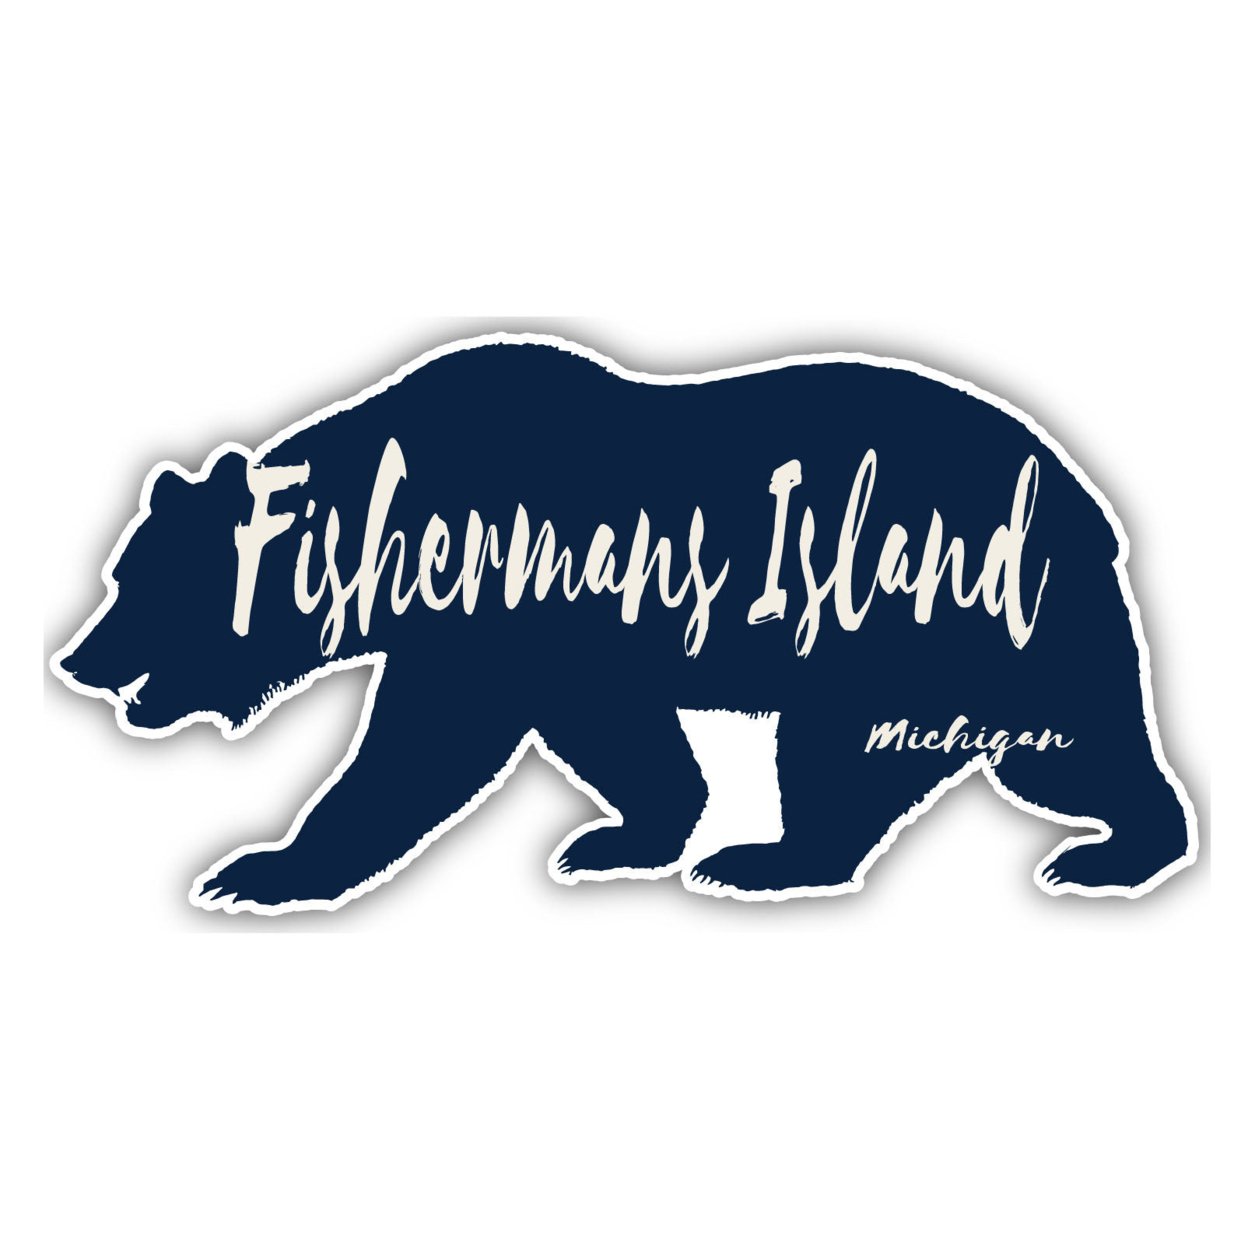 Fishermans Island Michigan Souvenir Decorative Stickers (Choose Theme And Size) - 4-Pack, 12-Inch, Bear